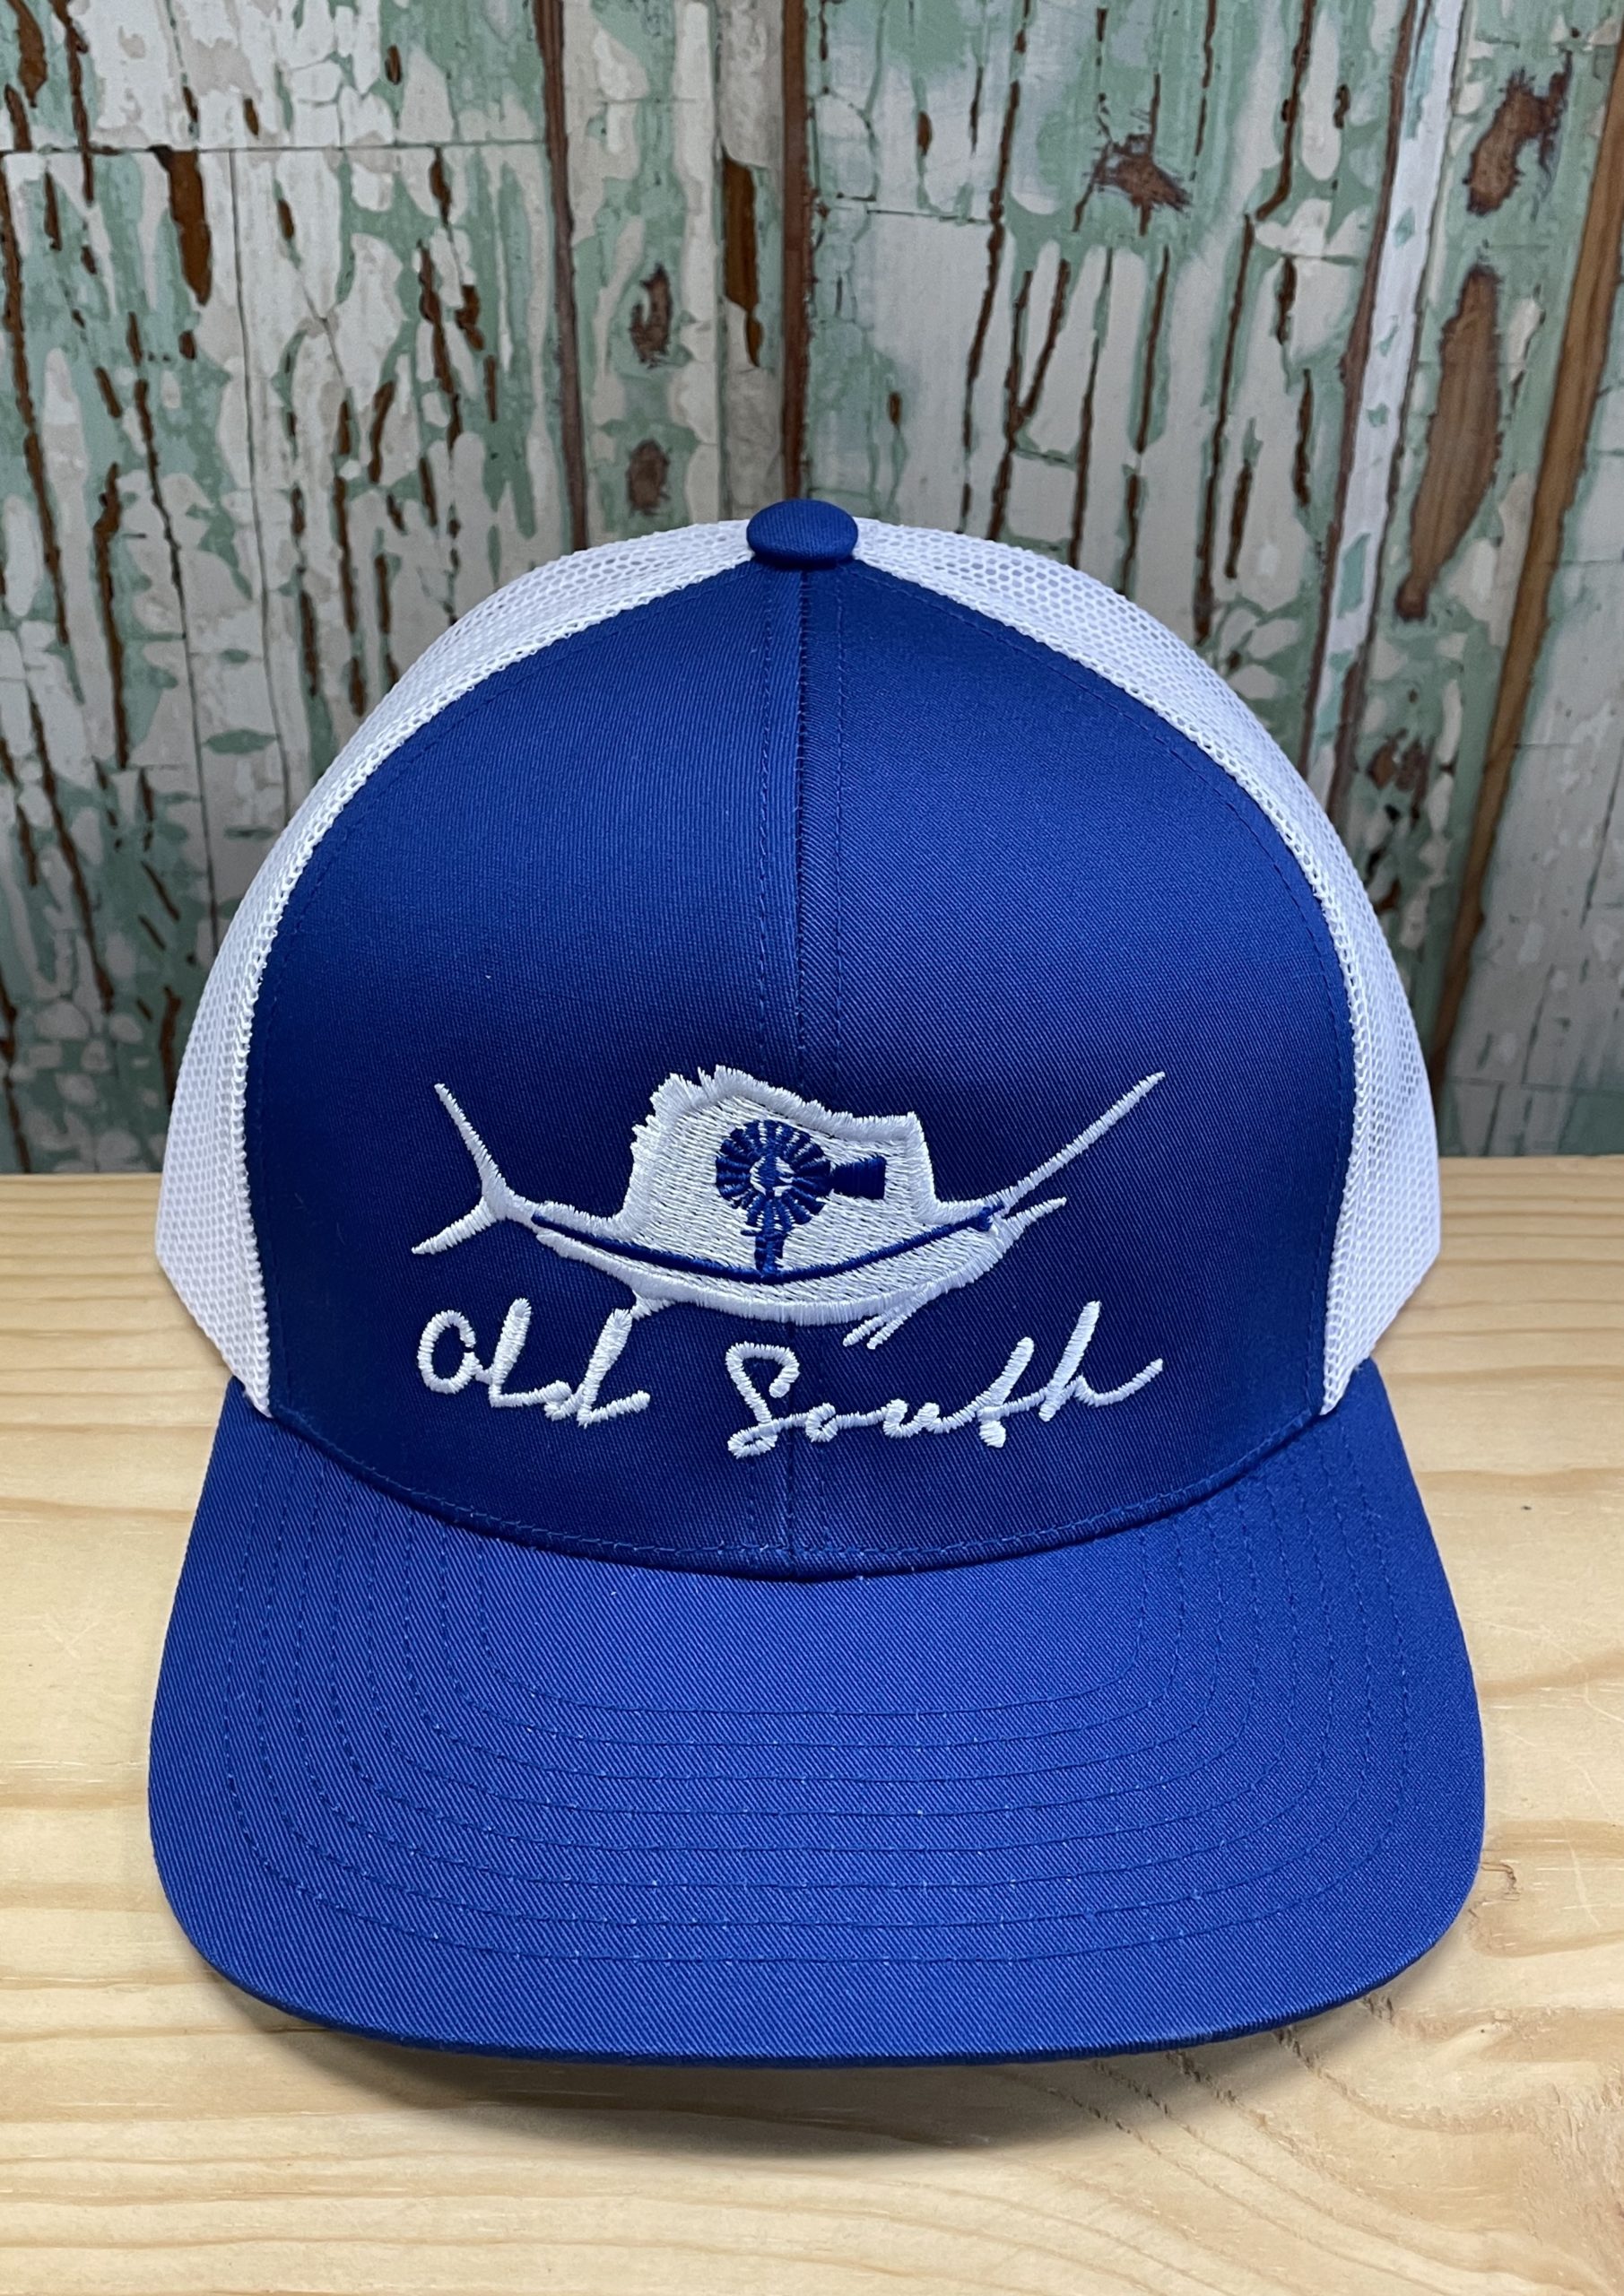 Old South Sailfish Snapback Trucker Hat Royal Blue/White – AG Outfitters NC